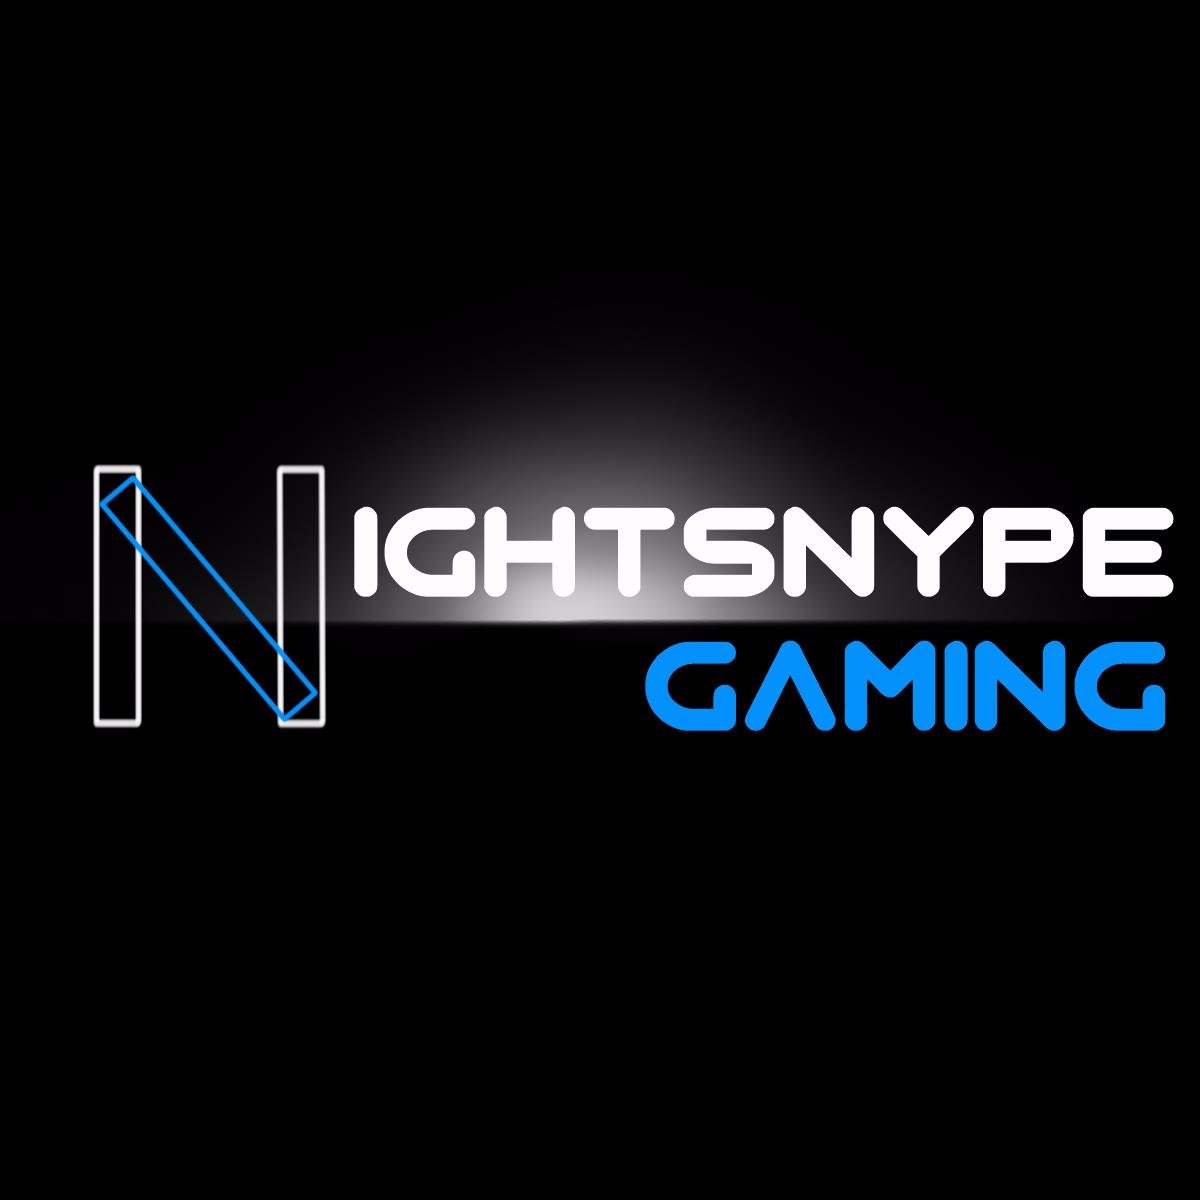 Streaming and Broadcasting your favorite games. add me on PSN : NIGHTSNYPE_
check out my YouTube page for gameplay videos: Nightsnype Gaming